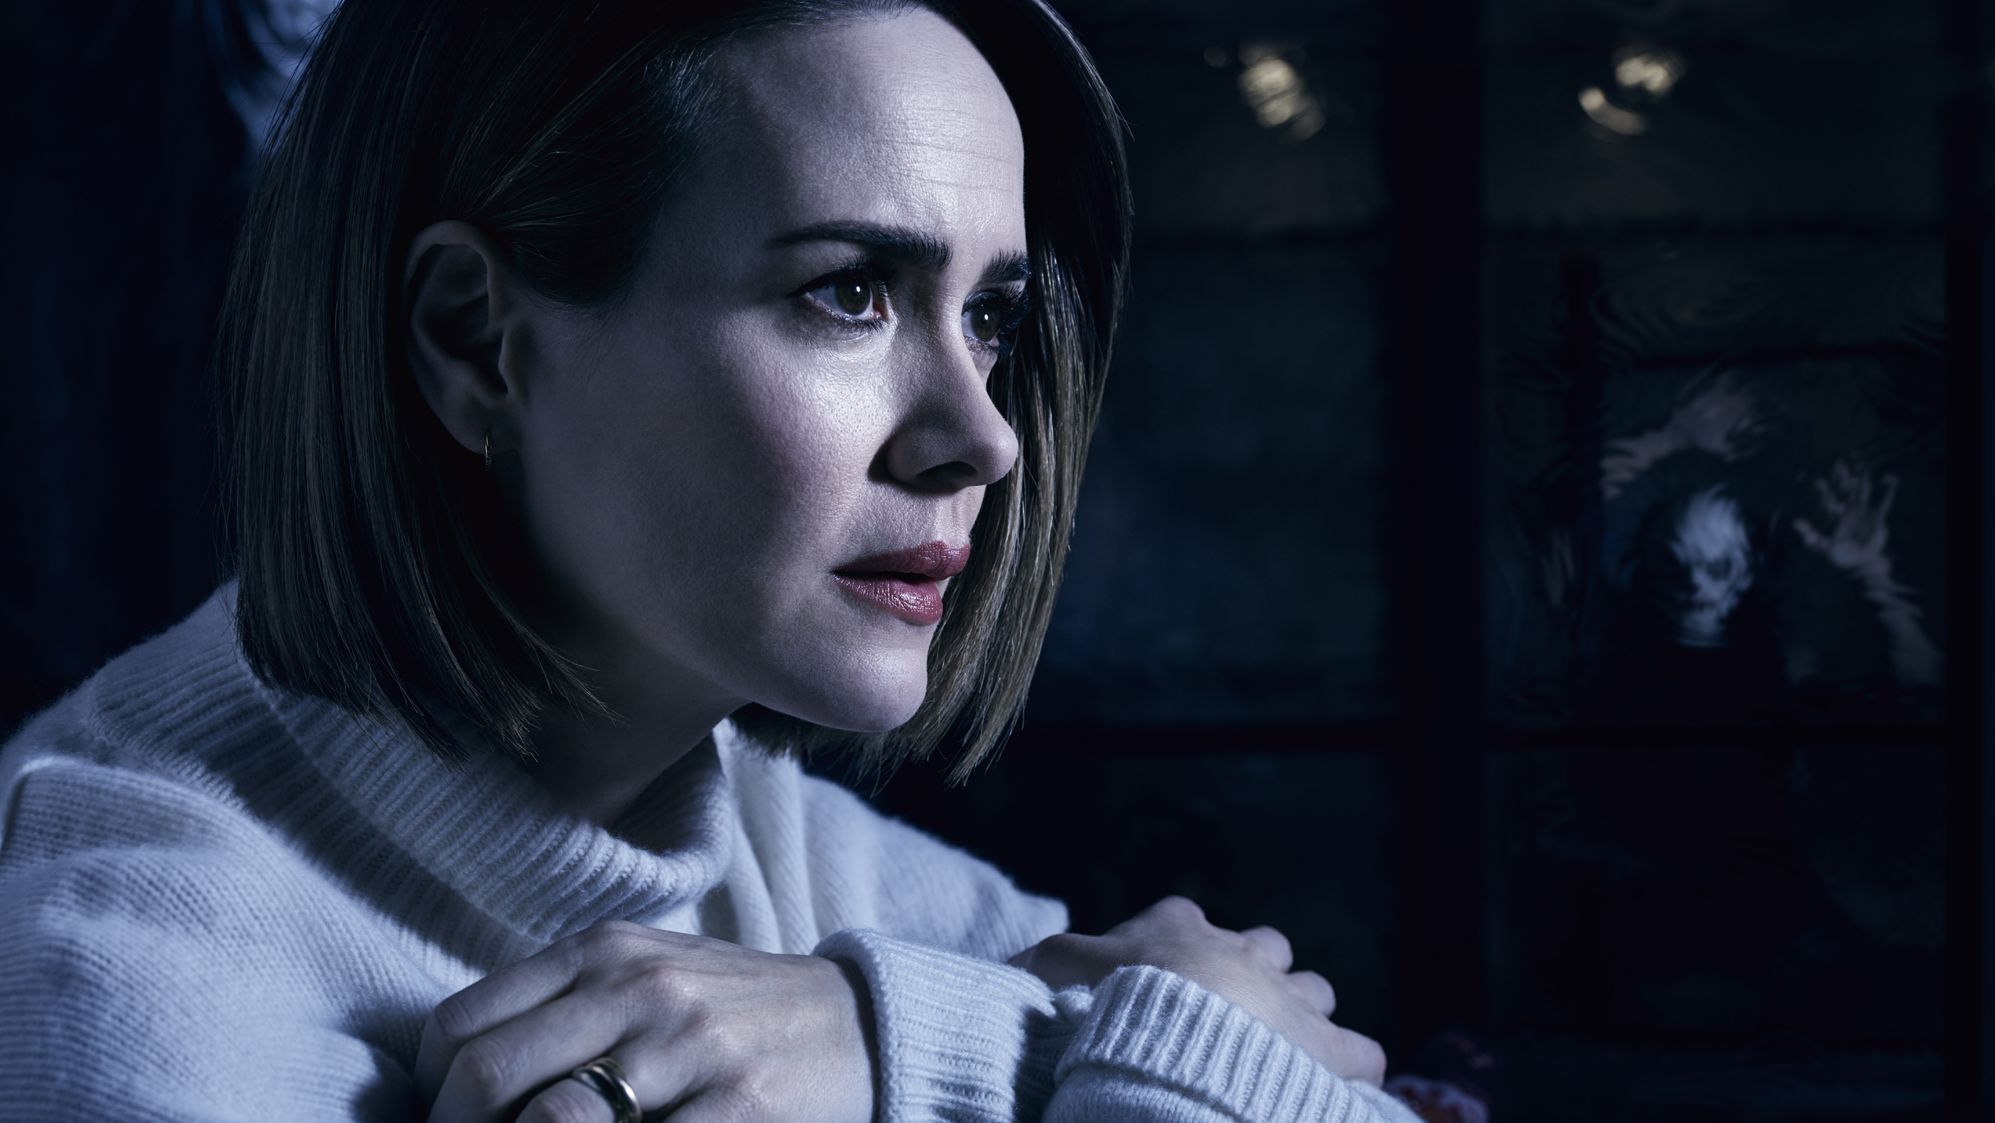 Sarah Paulson stars in "American Horror Story: Cult." Promotions for the show are triggering people with trypophobia.